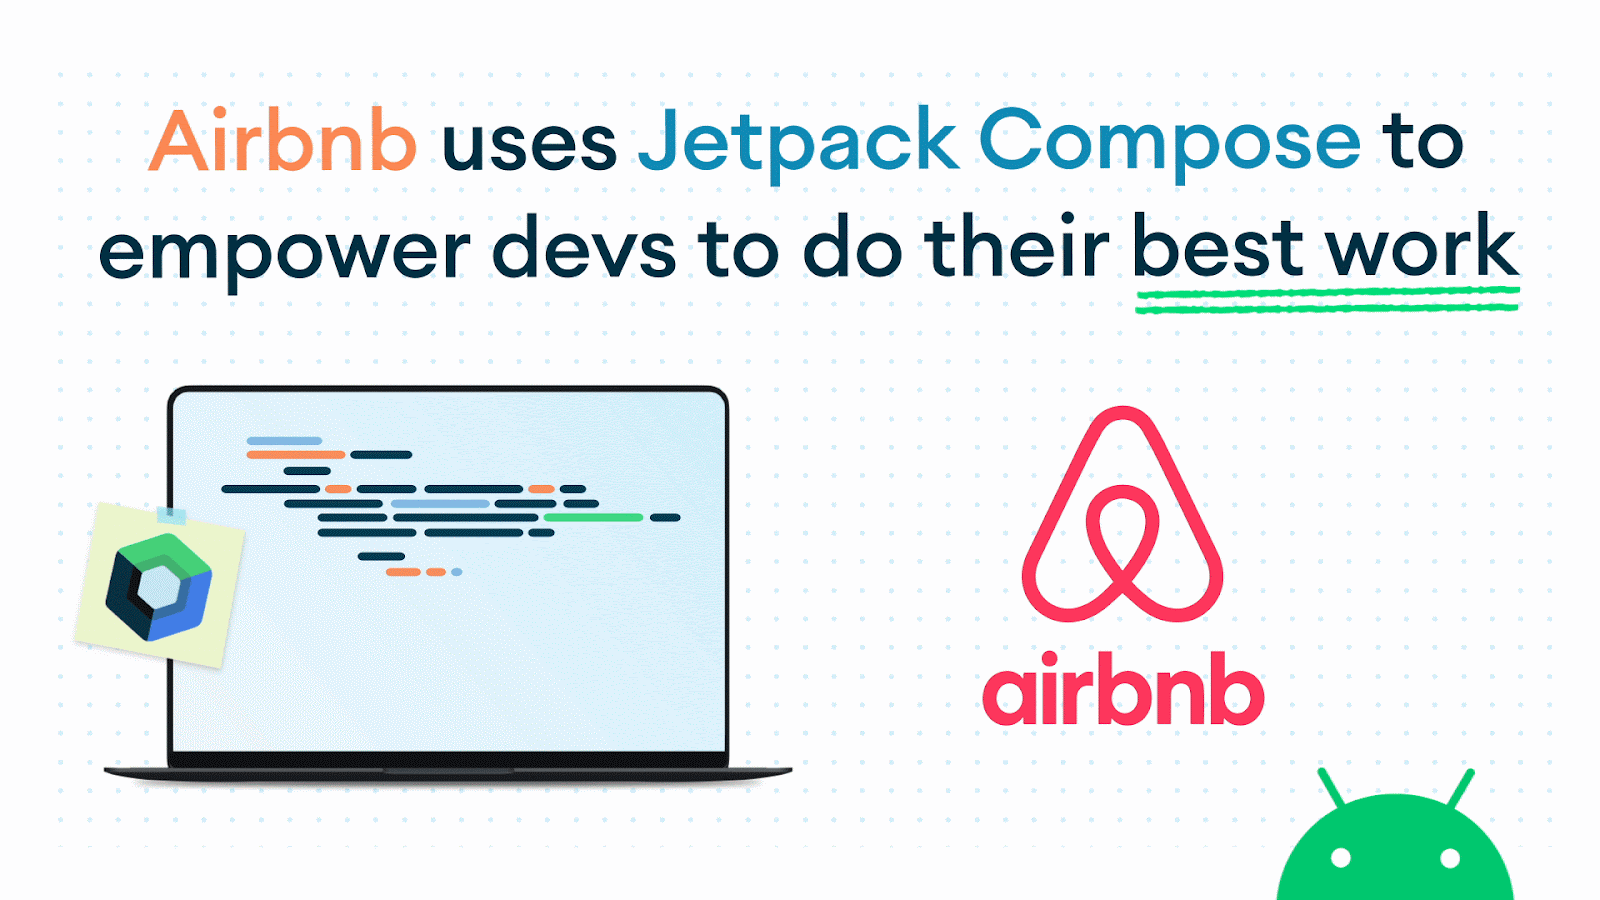 Airbnb uses Jetpack Compose to empower devs to do their best work